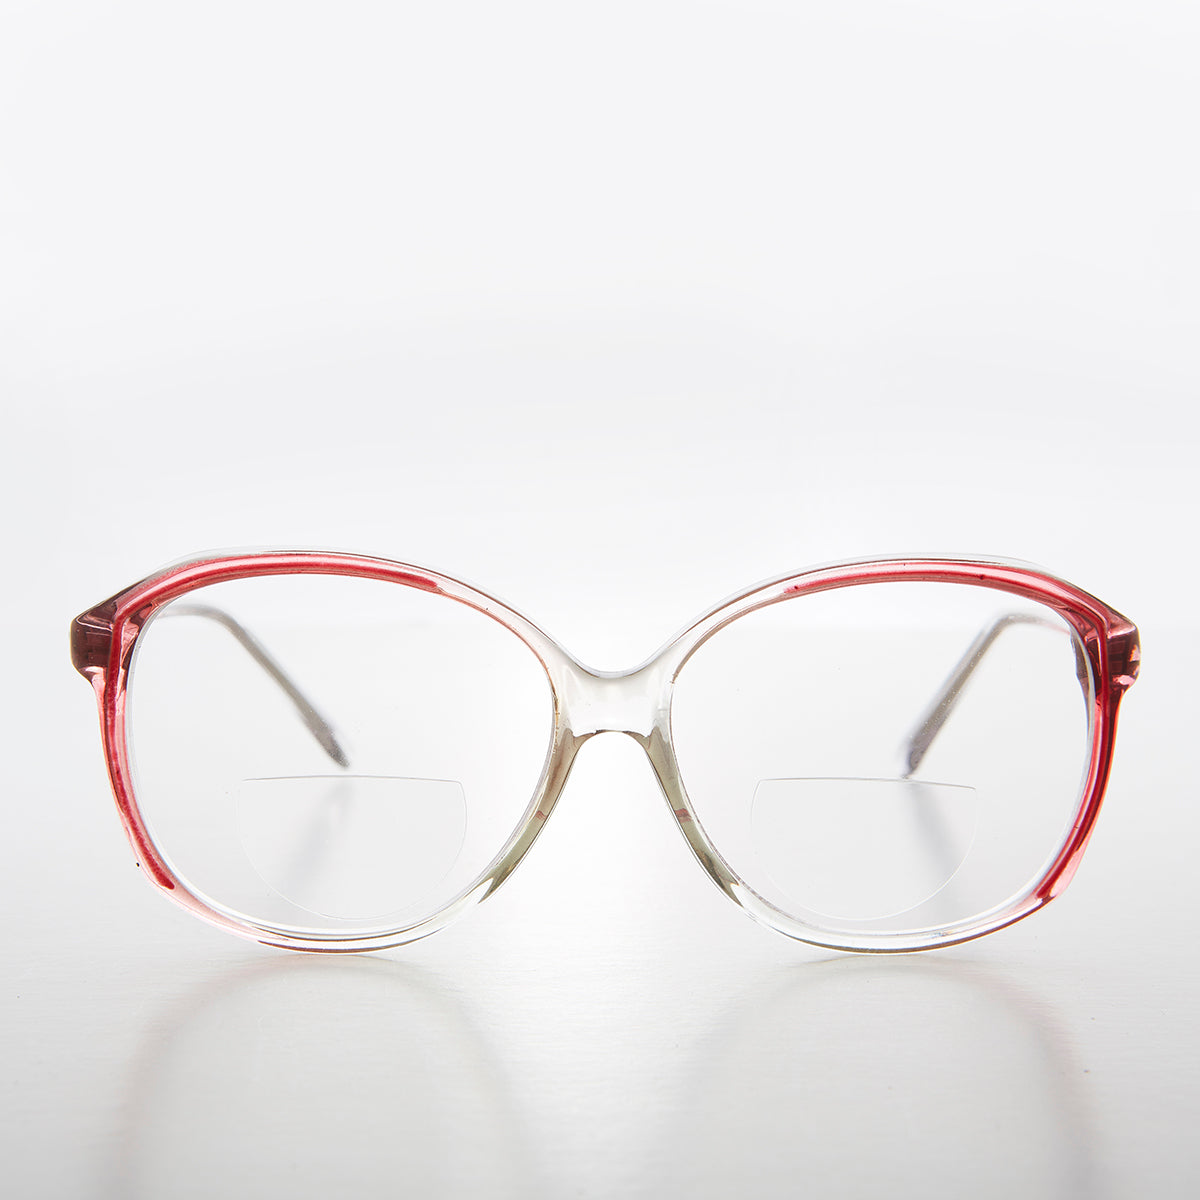 Women's Bifocal Reading Glasses with Color Accent 